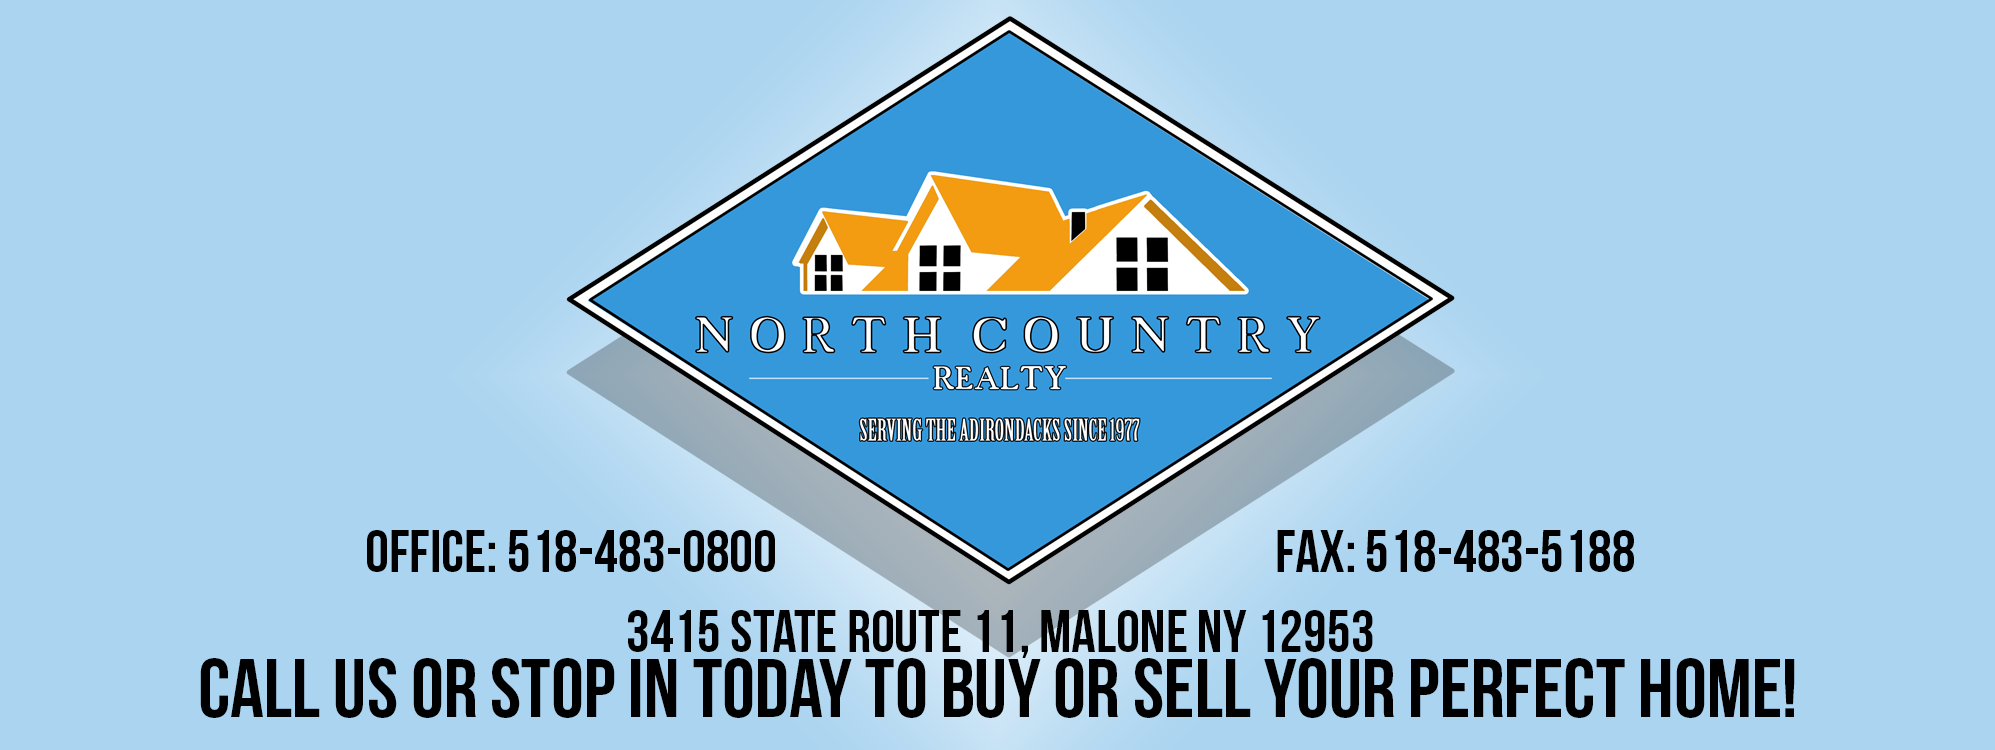 North Country Realty - Malone NY Real Estate